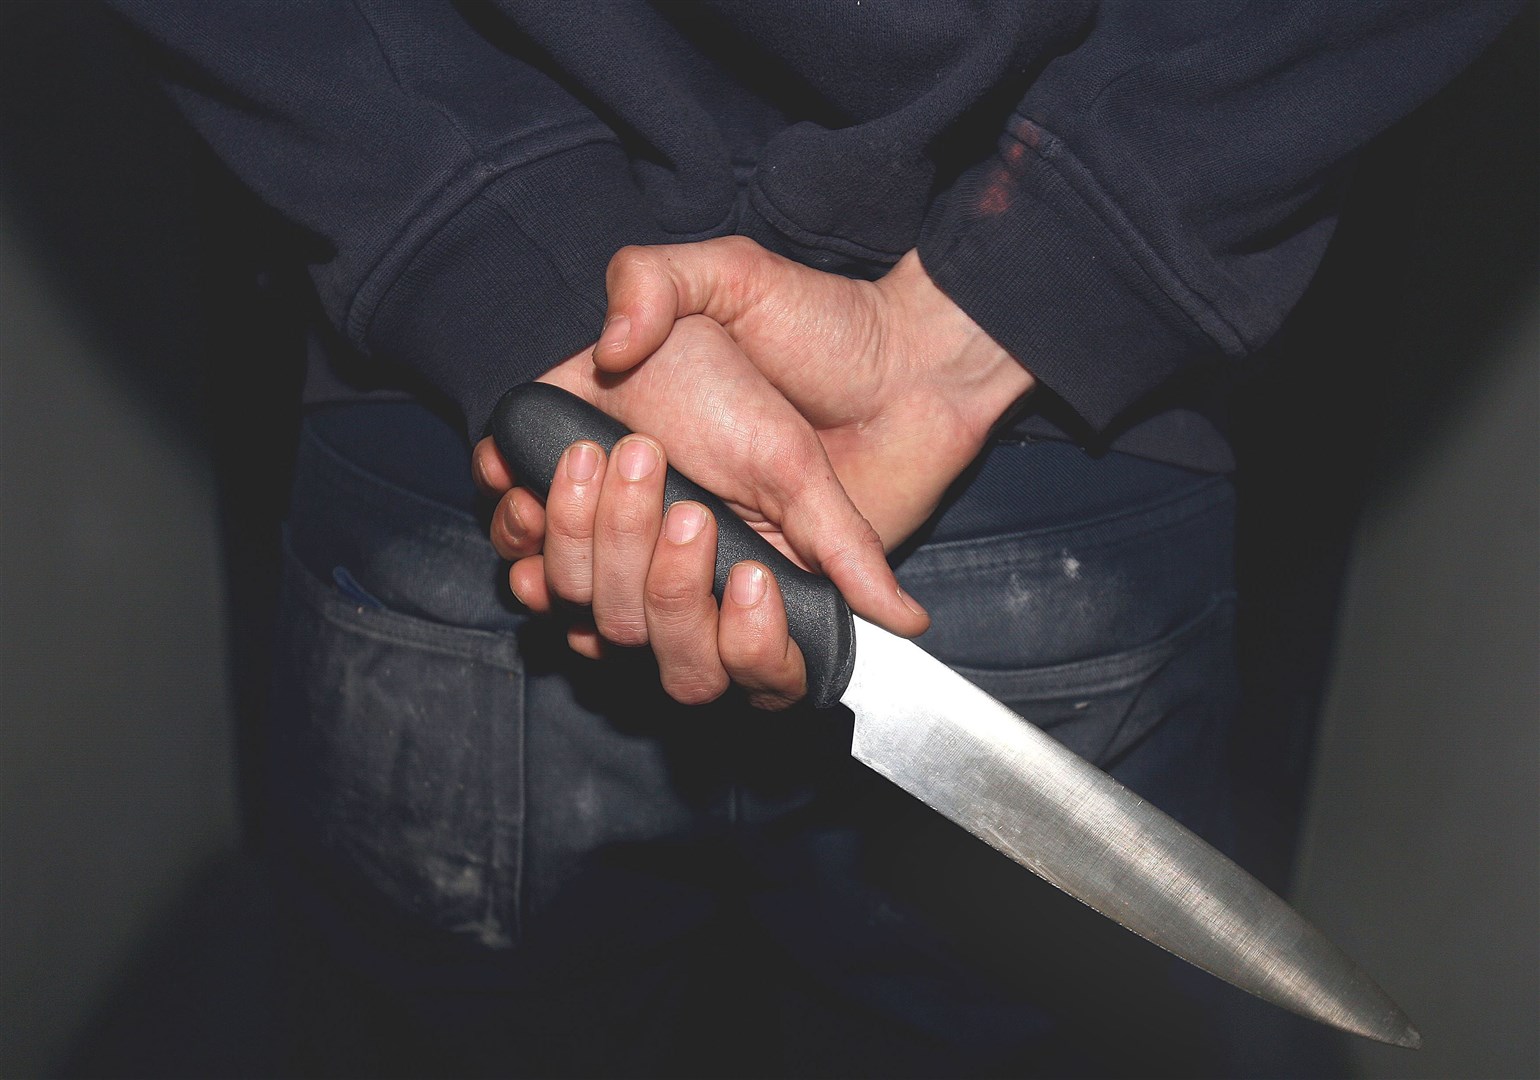 Total violent crime fell in London in 2020 but knife crime with injury rose during the summer months, the Metropolitan Police said (Katie Collins/PA)